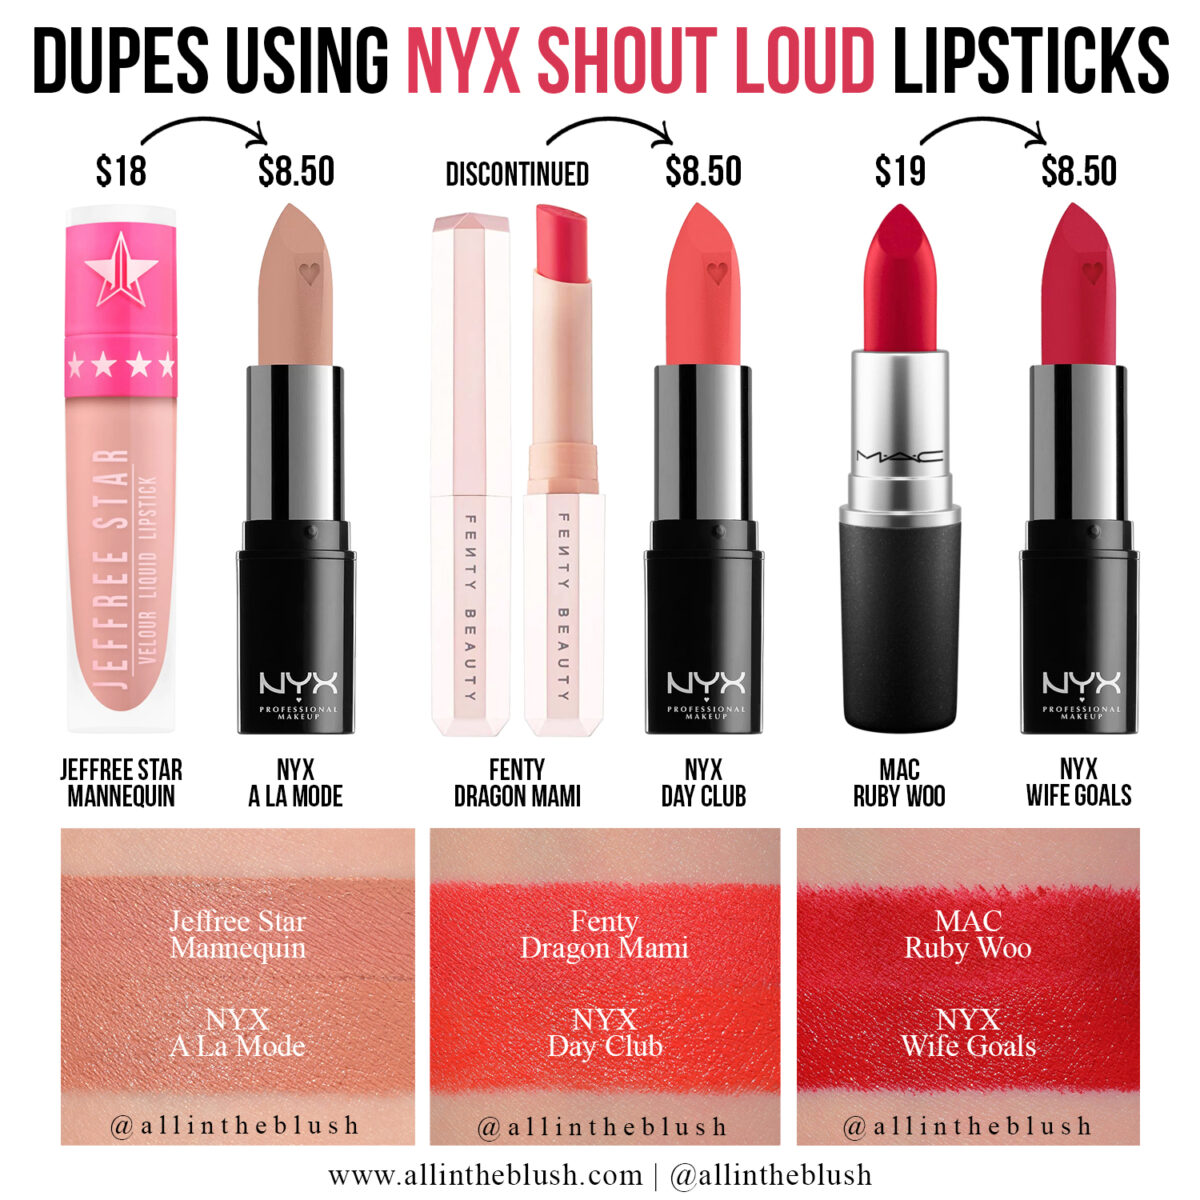 Dupes using the NYX Shout Loud Lipstick